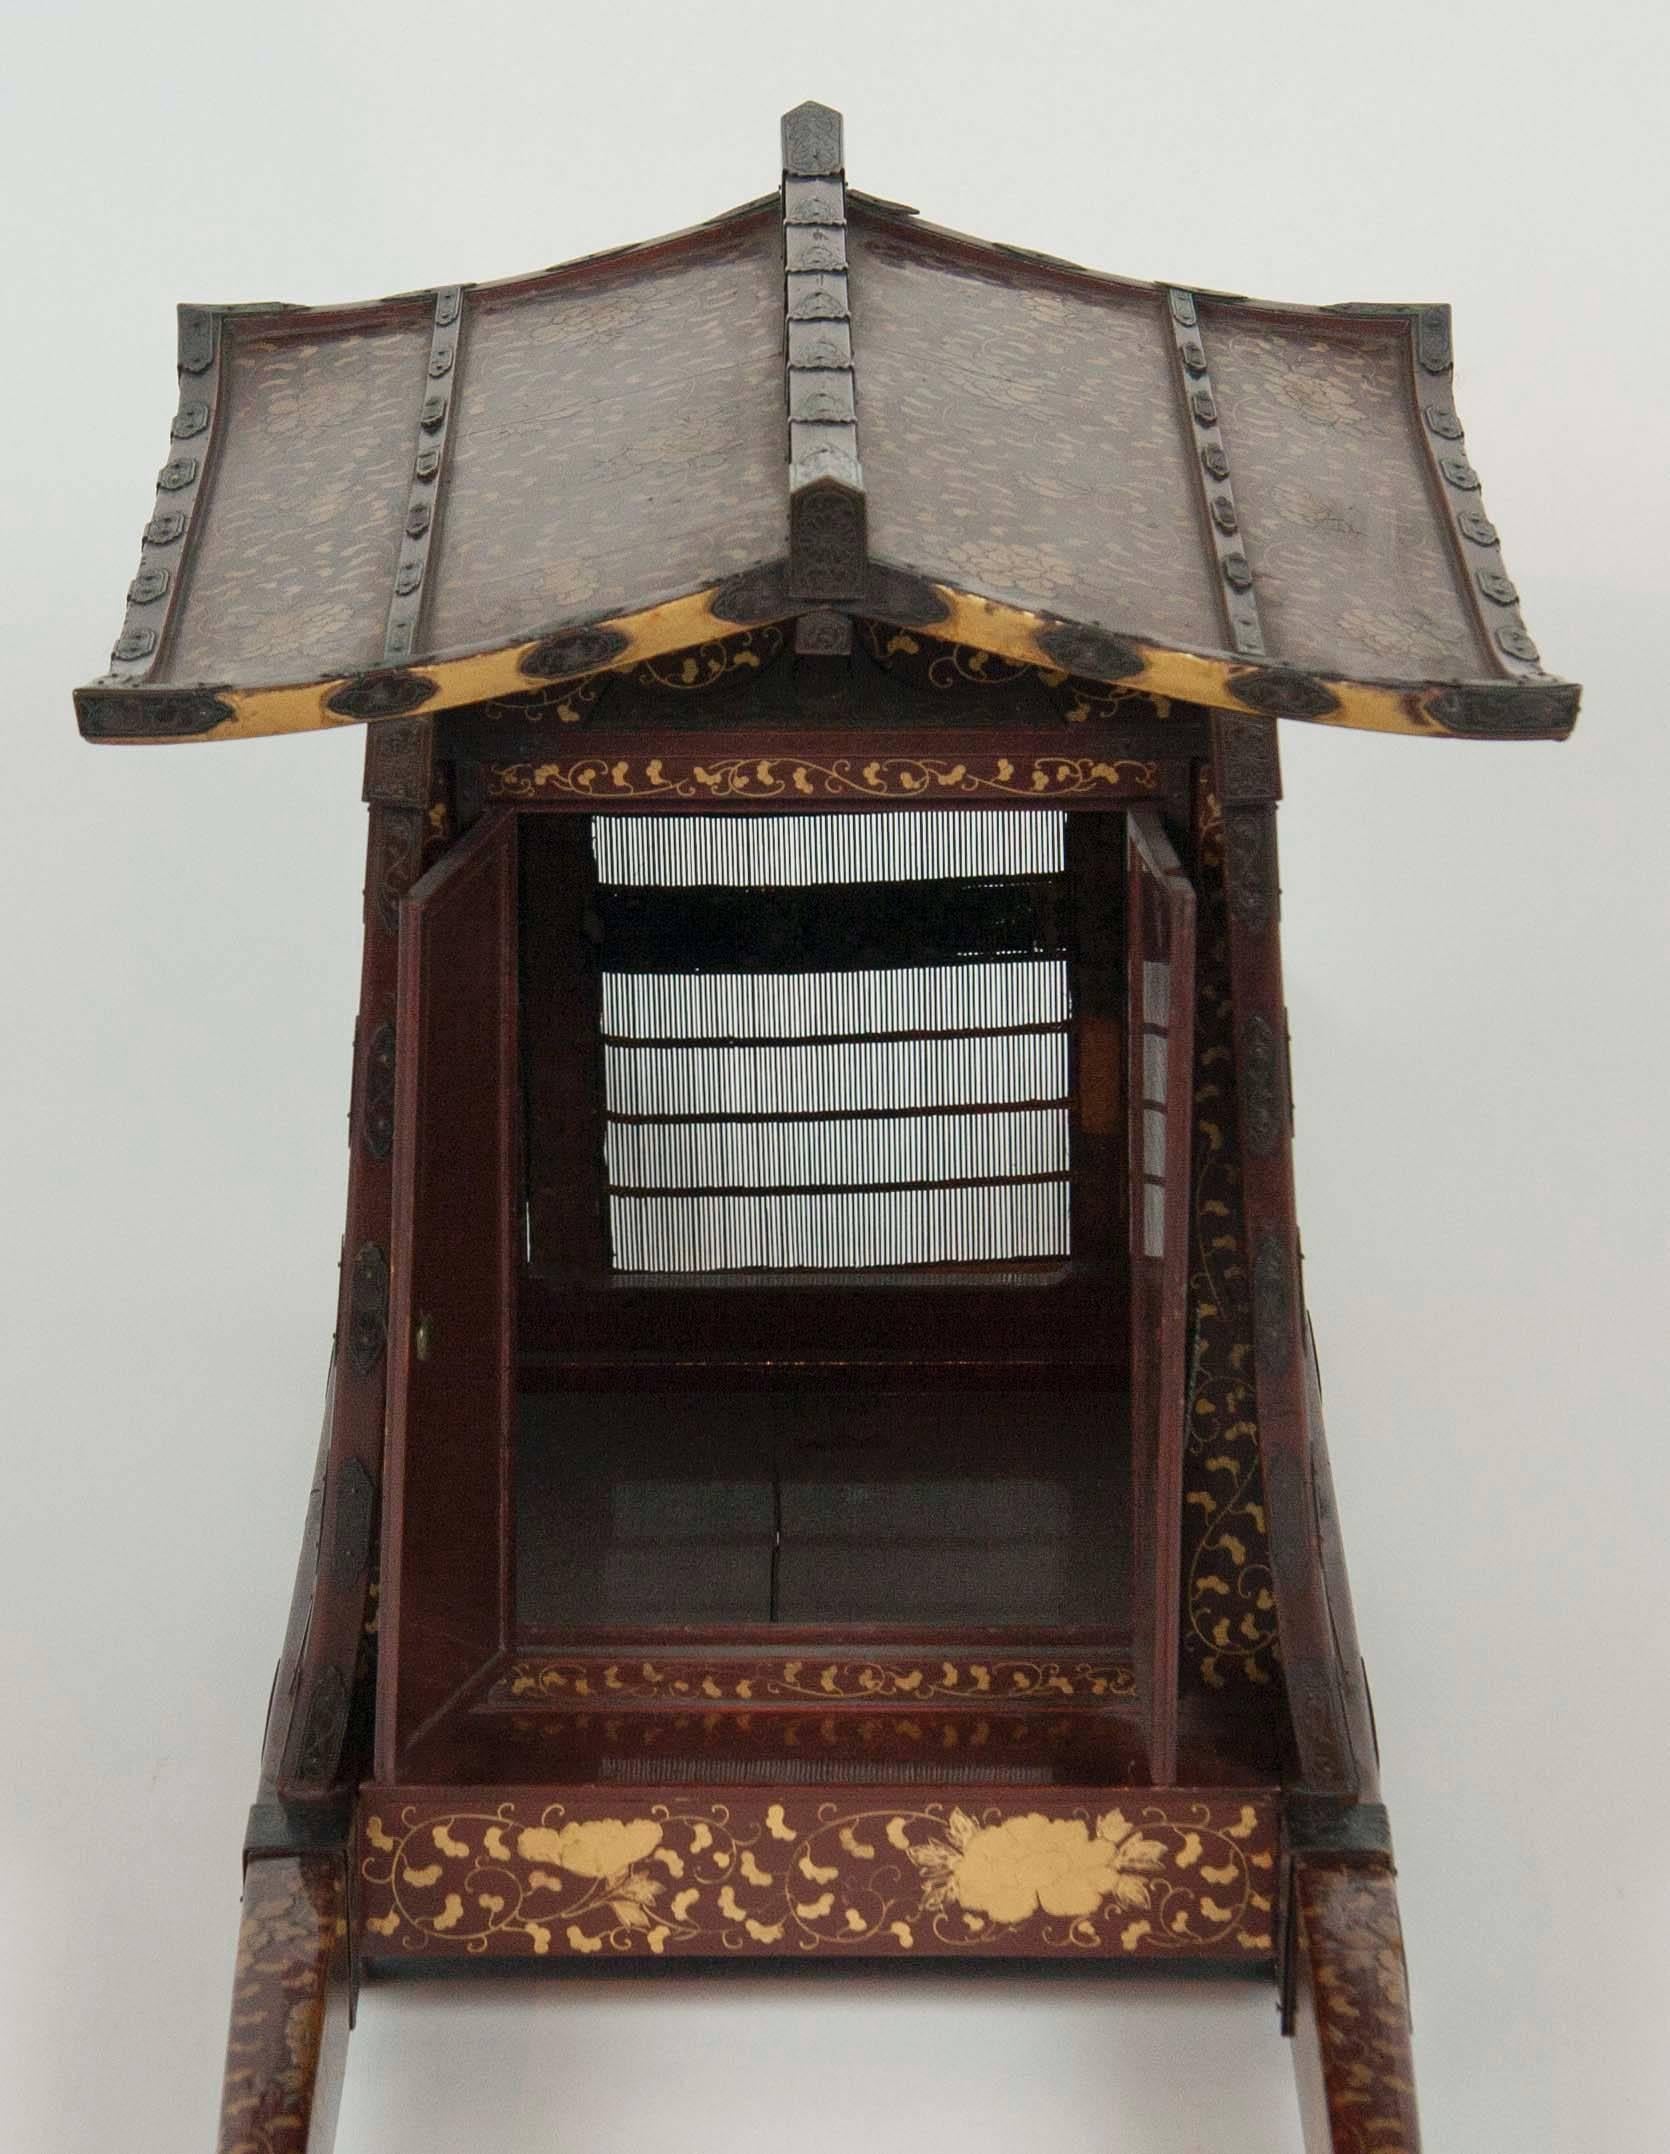 Japanese Edo-Meiji Period Lacquered Palanquin In Good Condition For Sale In Stamford, CT